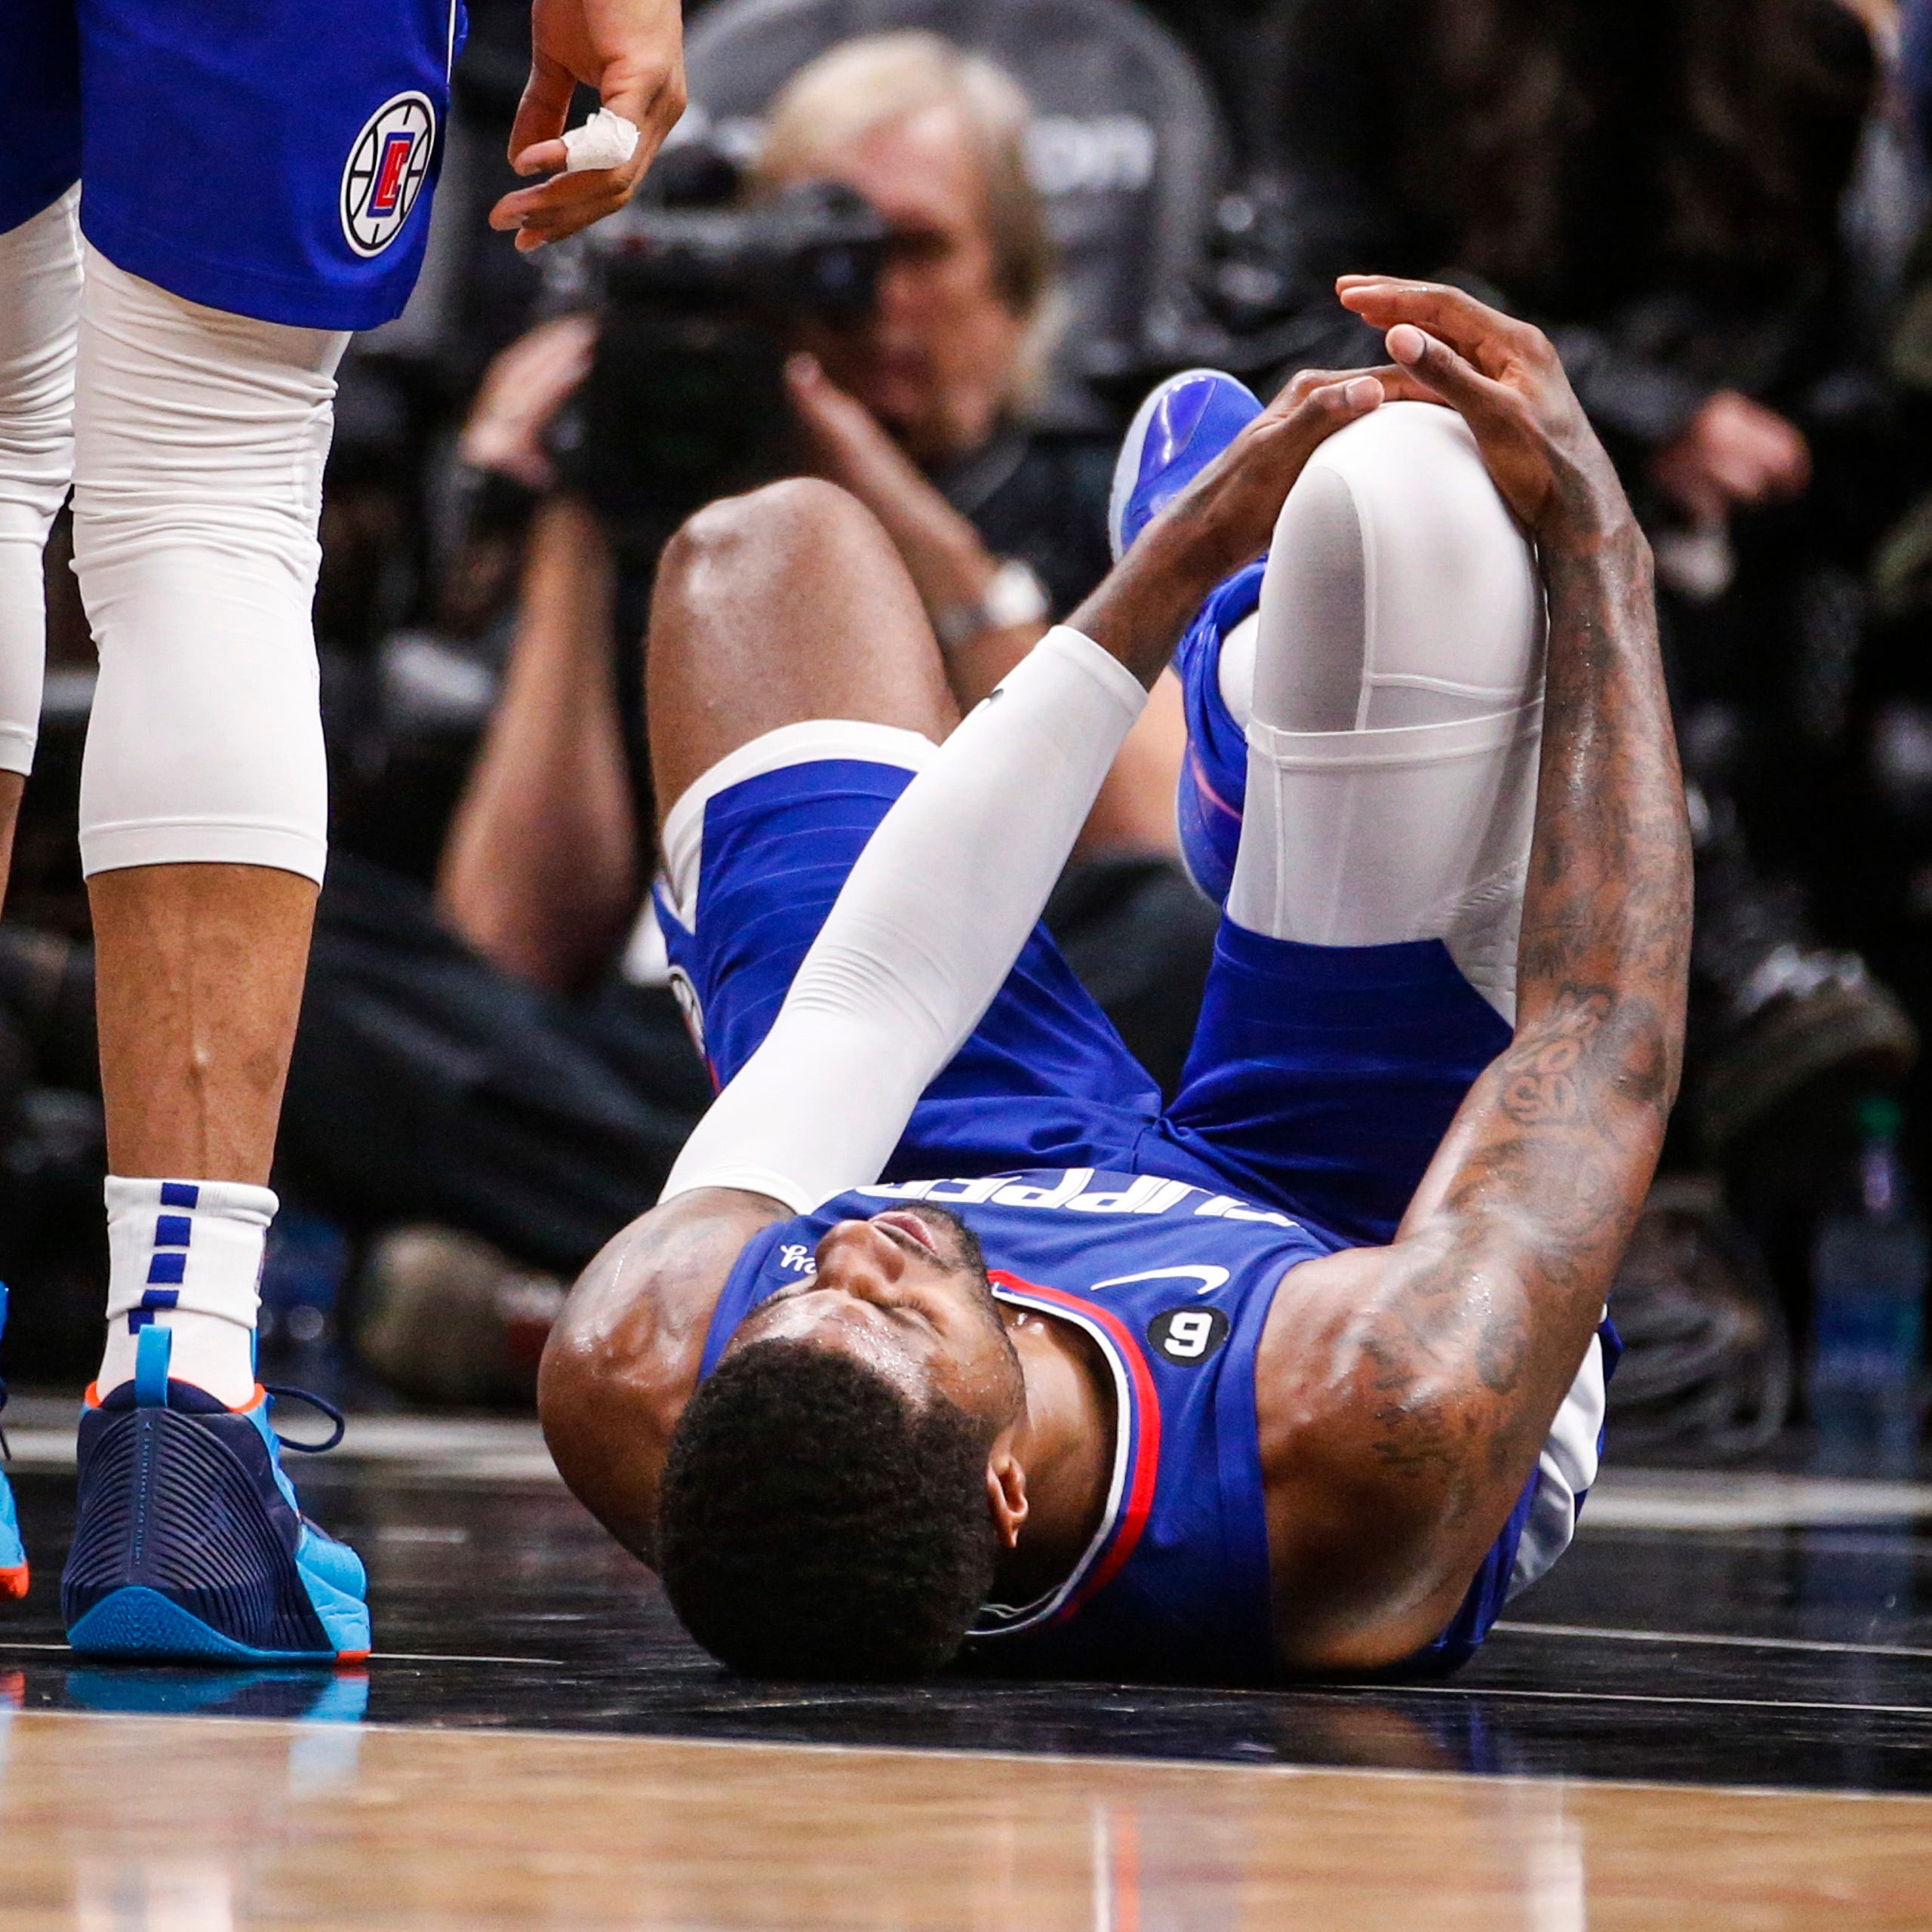 Los Angeles Clippers forward Paul George, right, lies on the court after suffering an apparent leg injury.